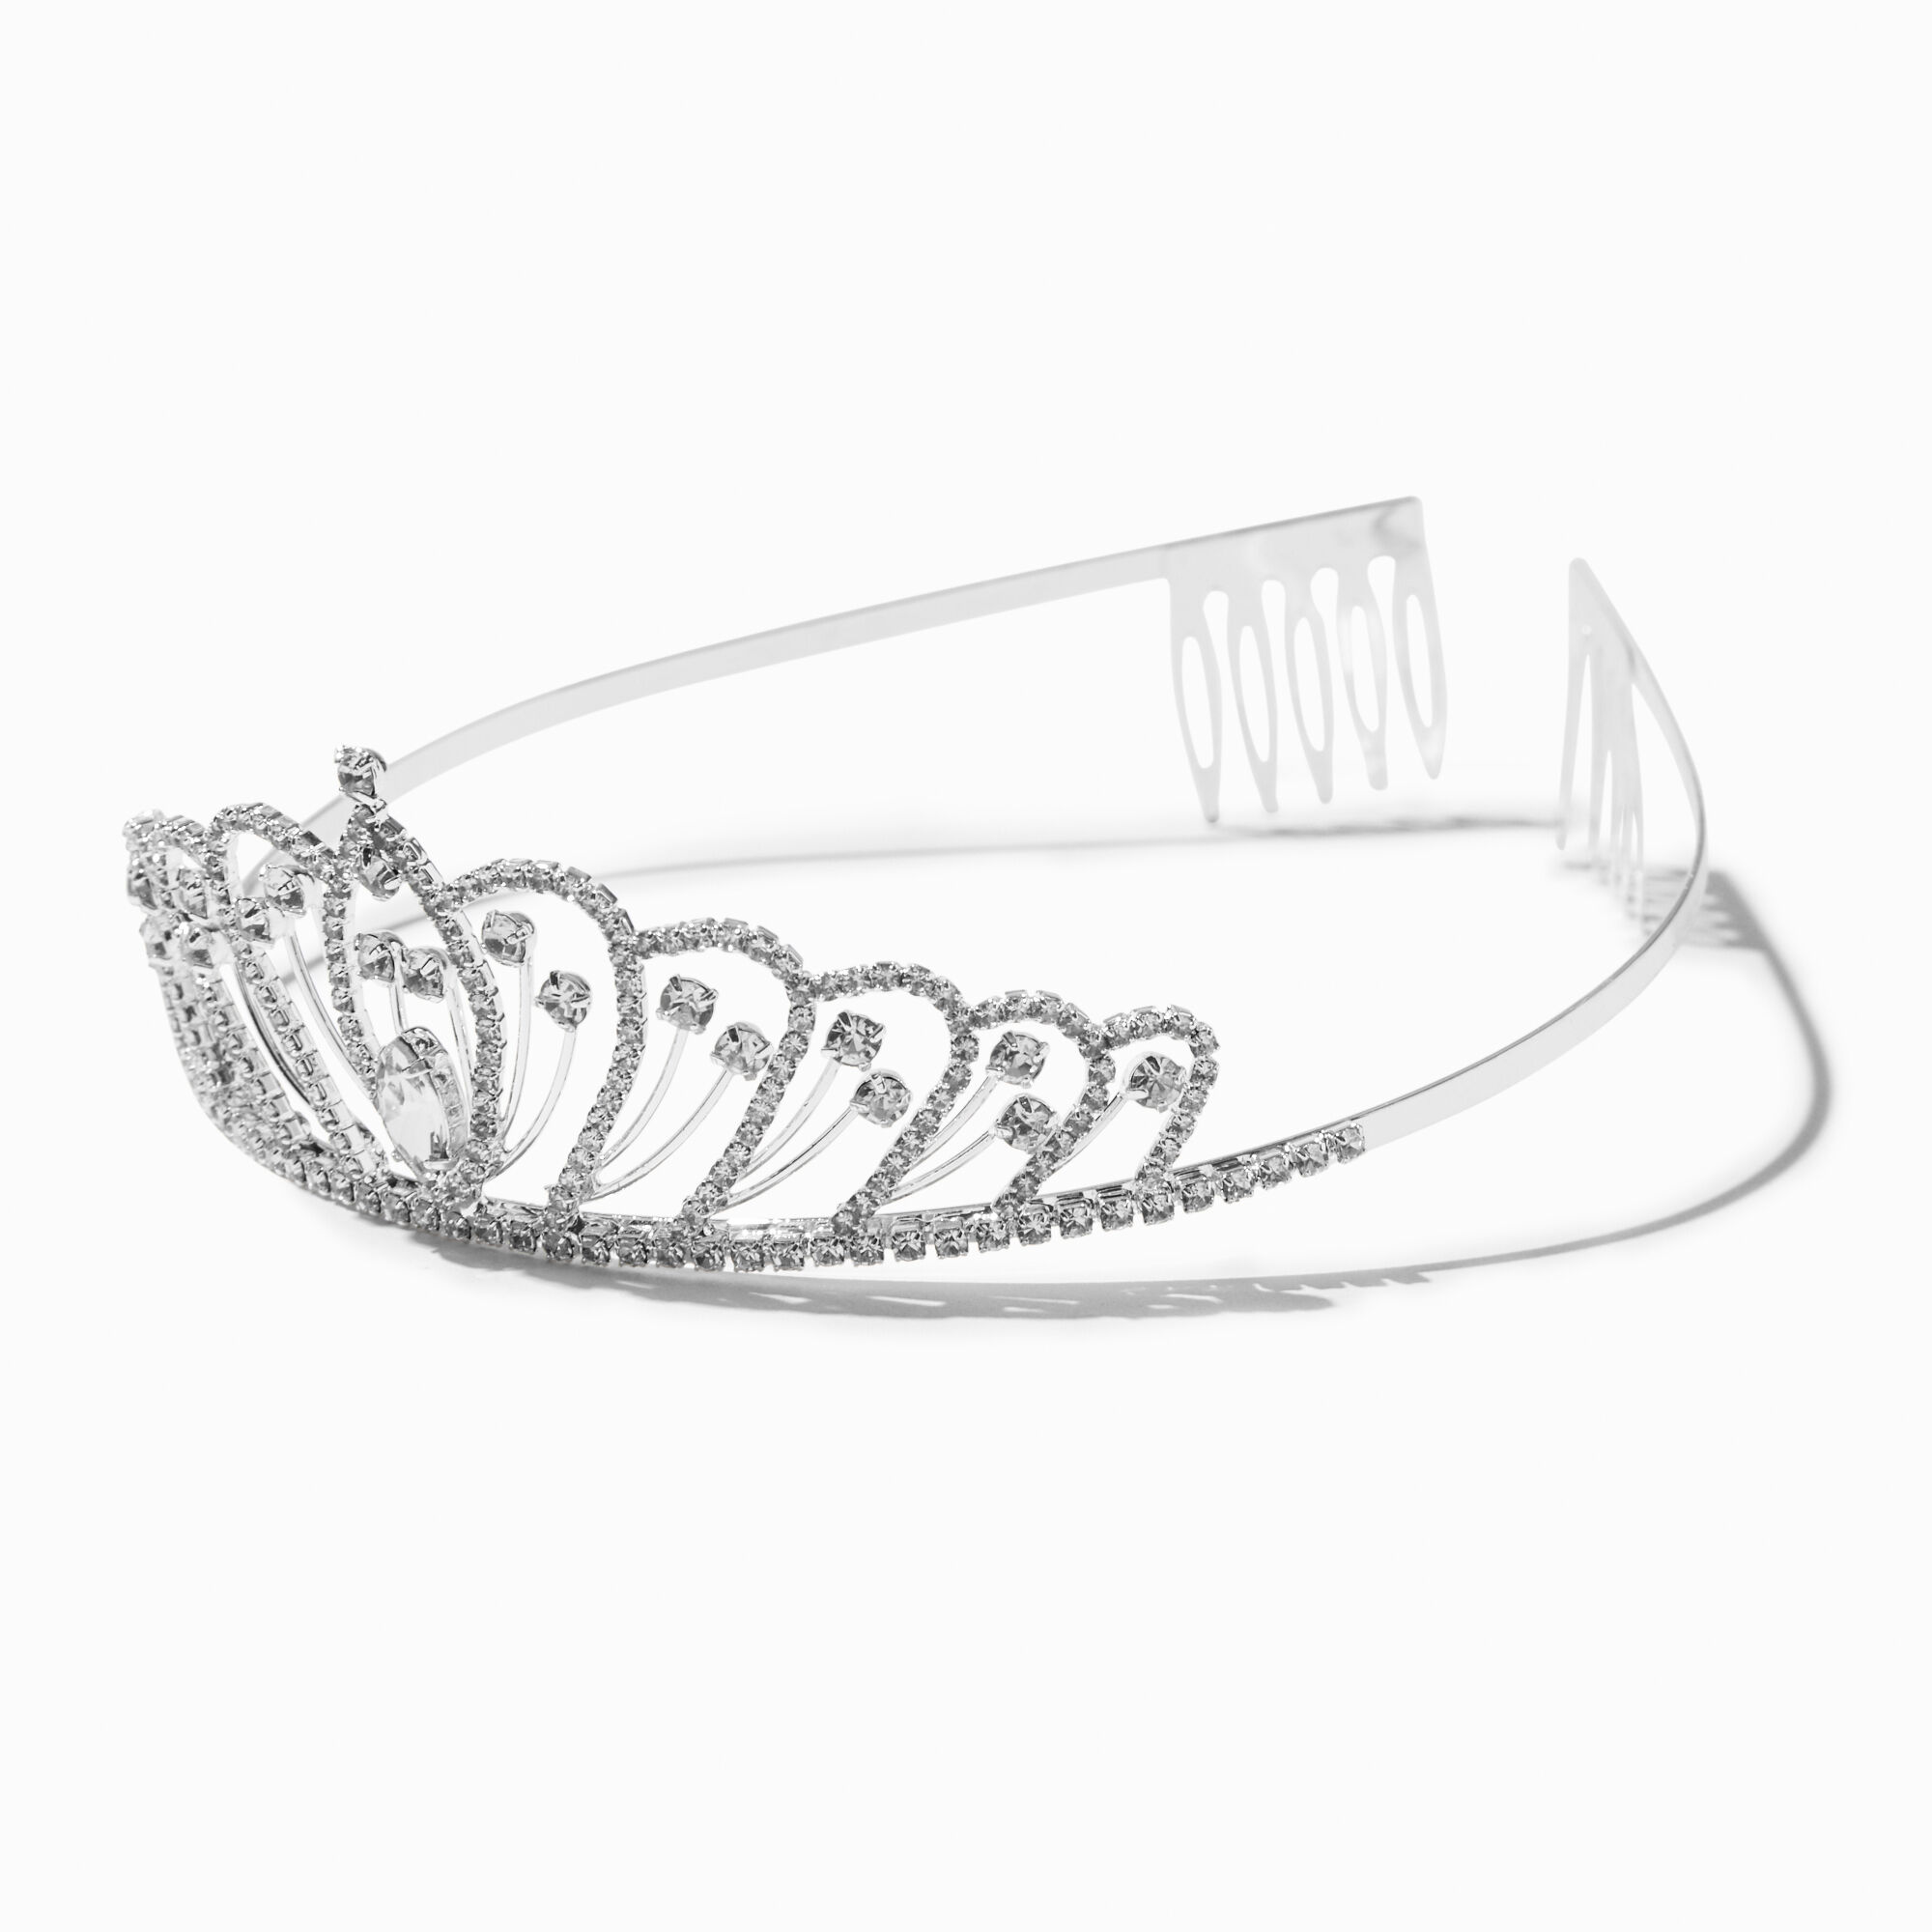 View Claires Crystal Dragonfly Tiara Silver information